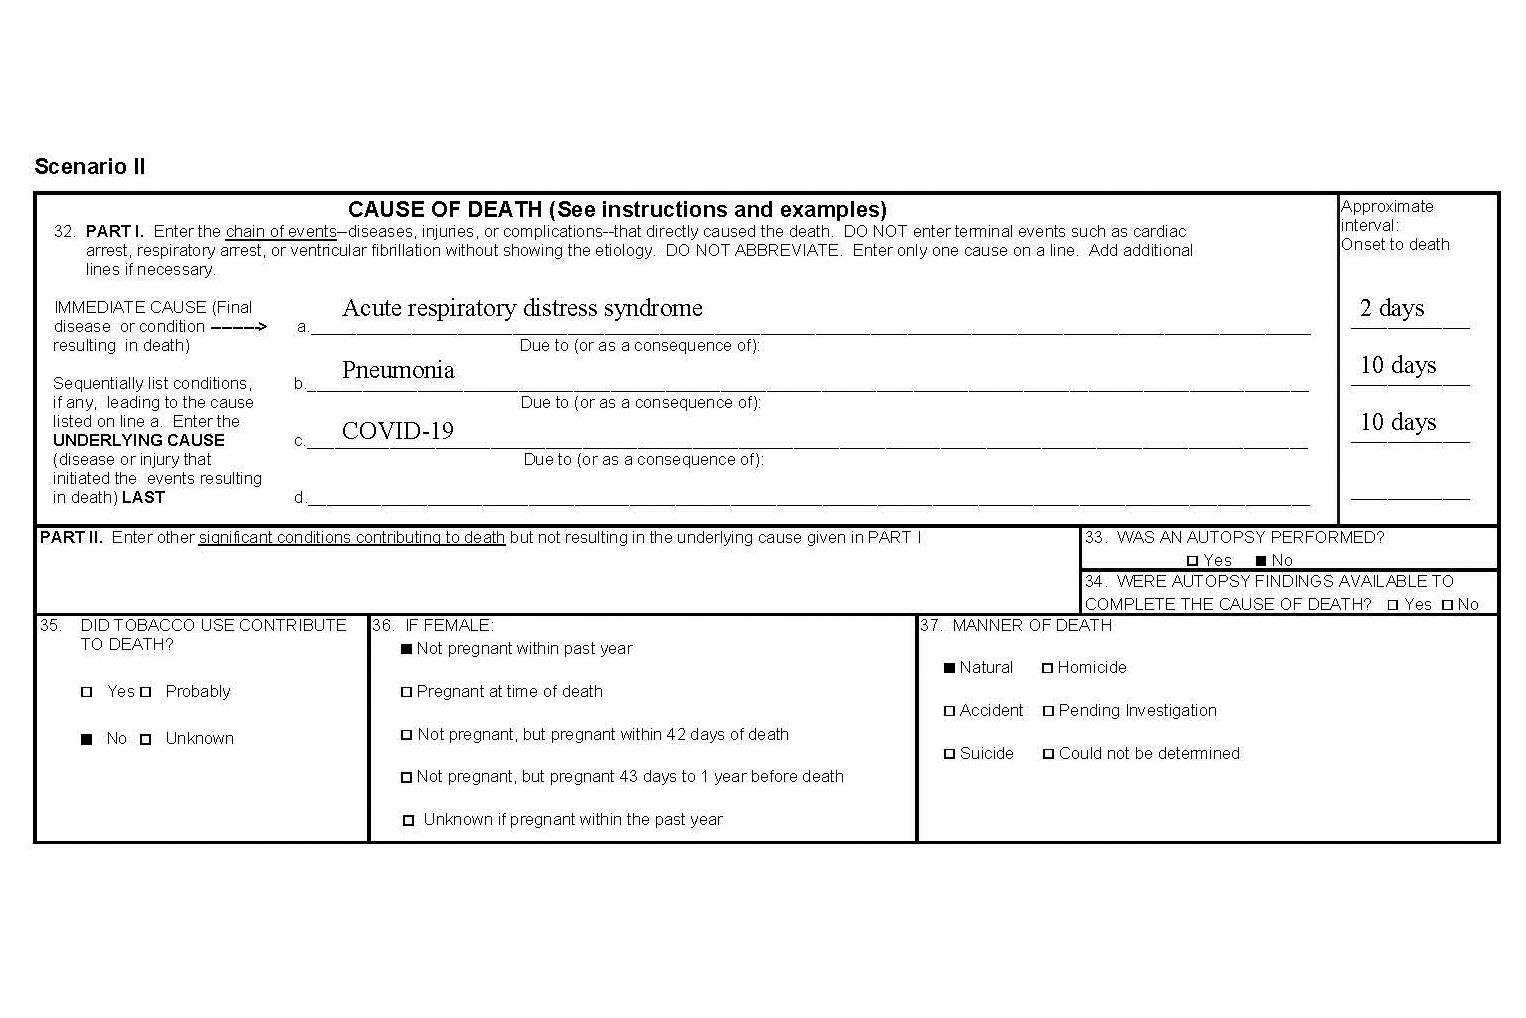 A sample death certificate from “Vital Statistics Reporting Guidance,” an April 2020 report by the Centers for Disease Control on how to record COVID-19 in deaths shows a hypothetical scenario for a woman who died of acute respiratory distress syndrome. (Illustration courtesy CDC)